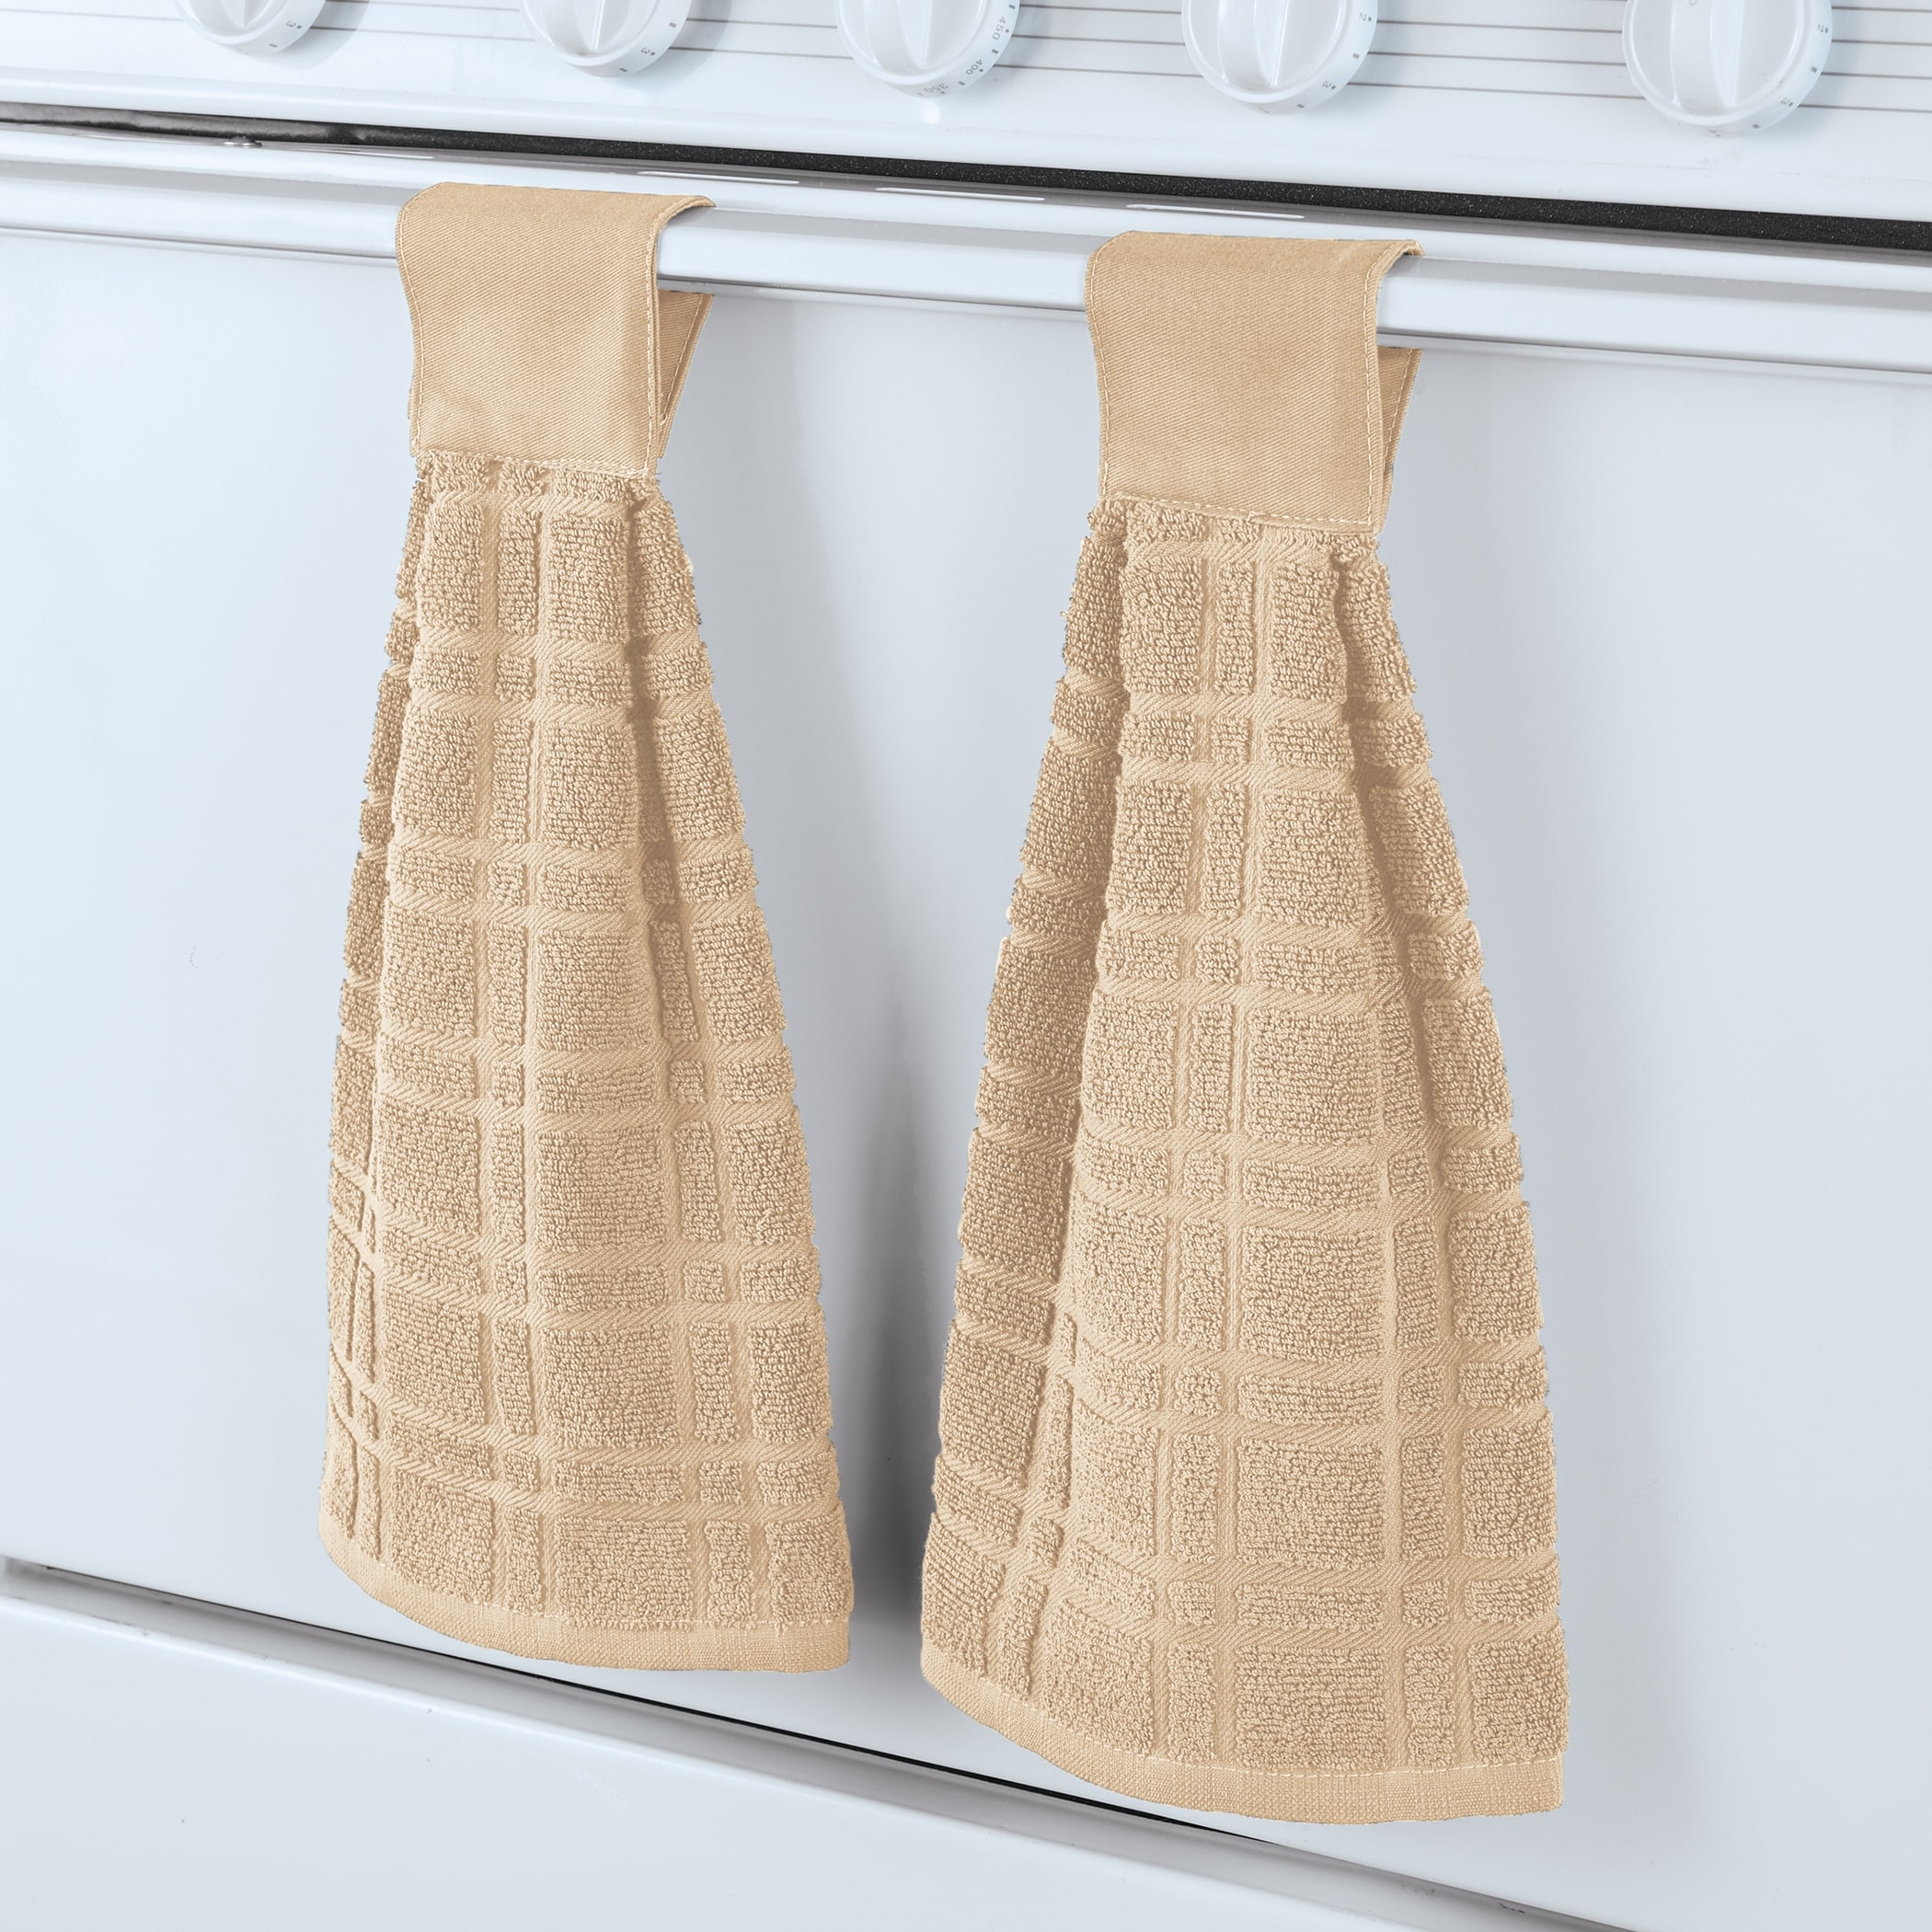 https://ak1.ostkcdn.com/images/products/is/images/direct/a0d8fbd3a430389d29e2395513c2ccead573146a/Hanging-Tufted-Design-Kitchen-Towels---Set-of-2.jpg